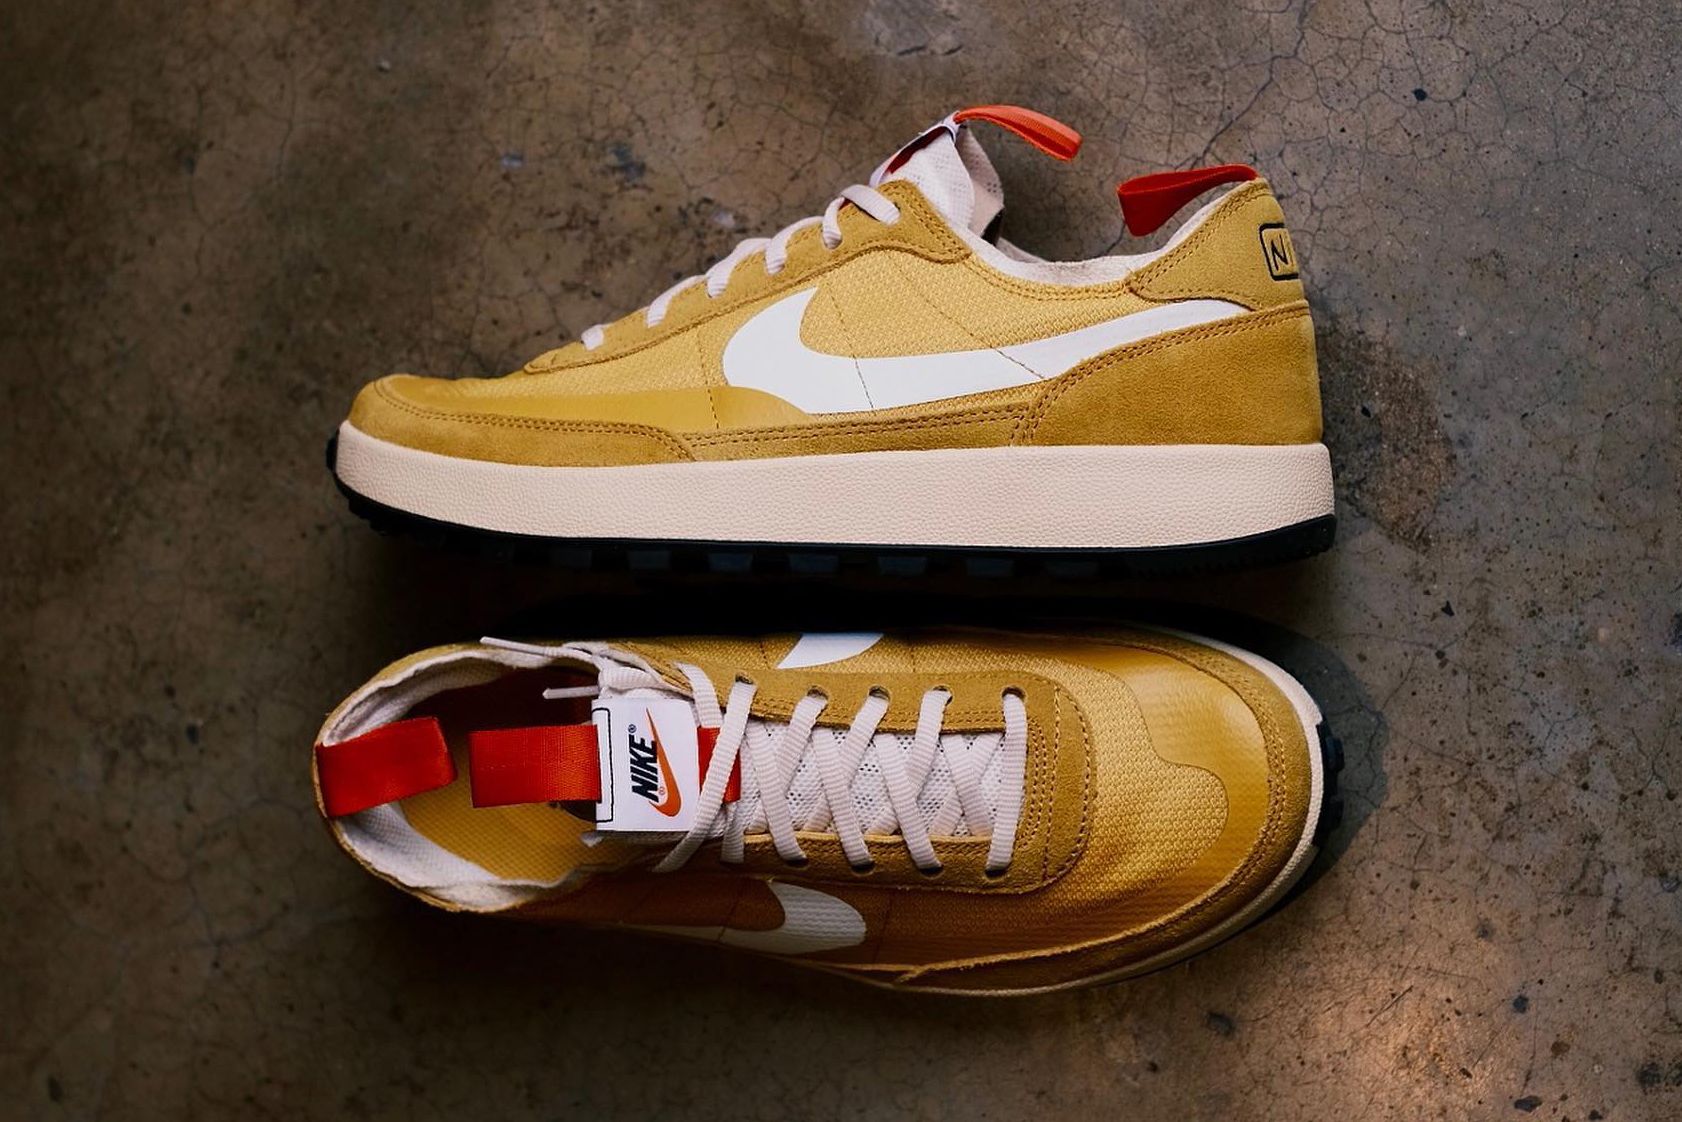 Detailed Look at the Tom Sachs x NikeCraft General Purpose Shoe 